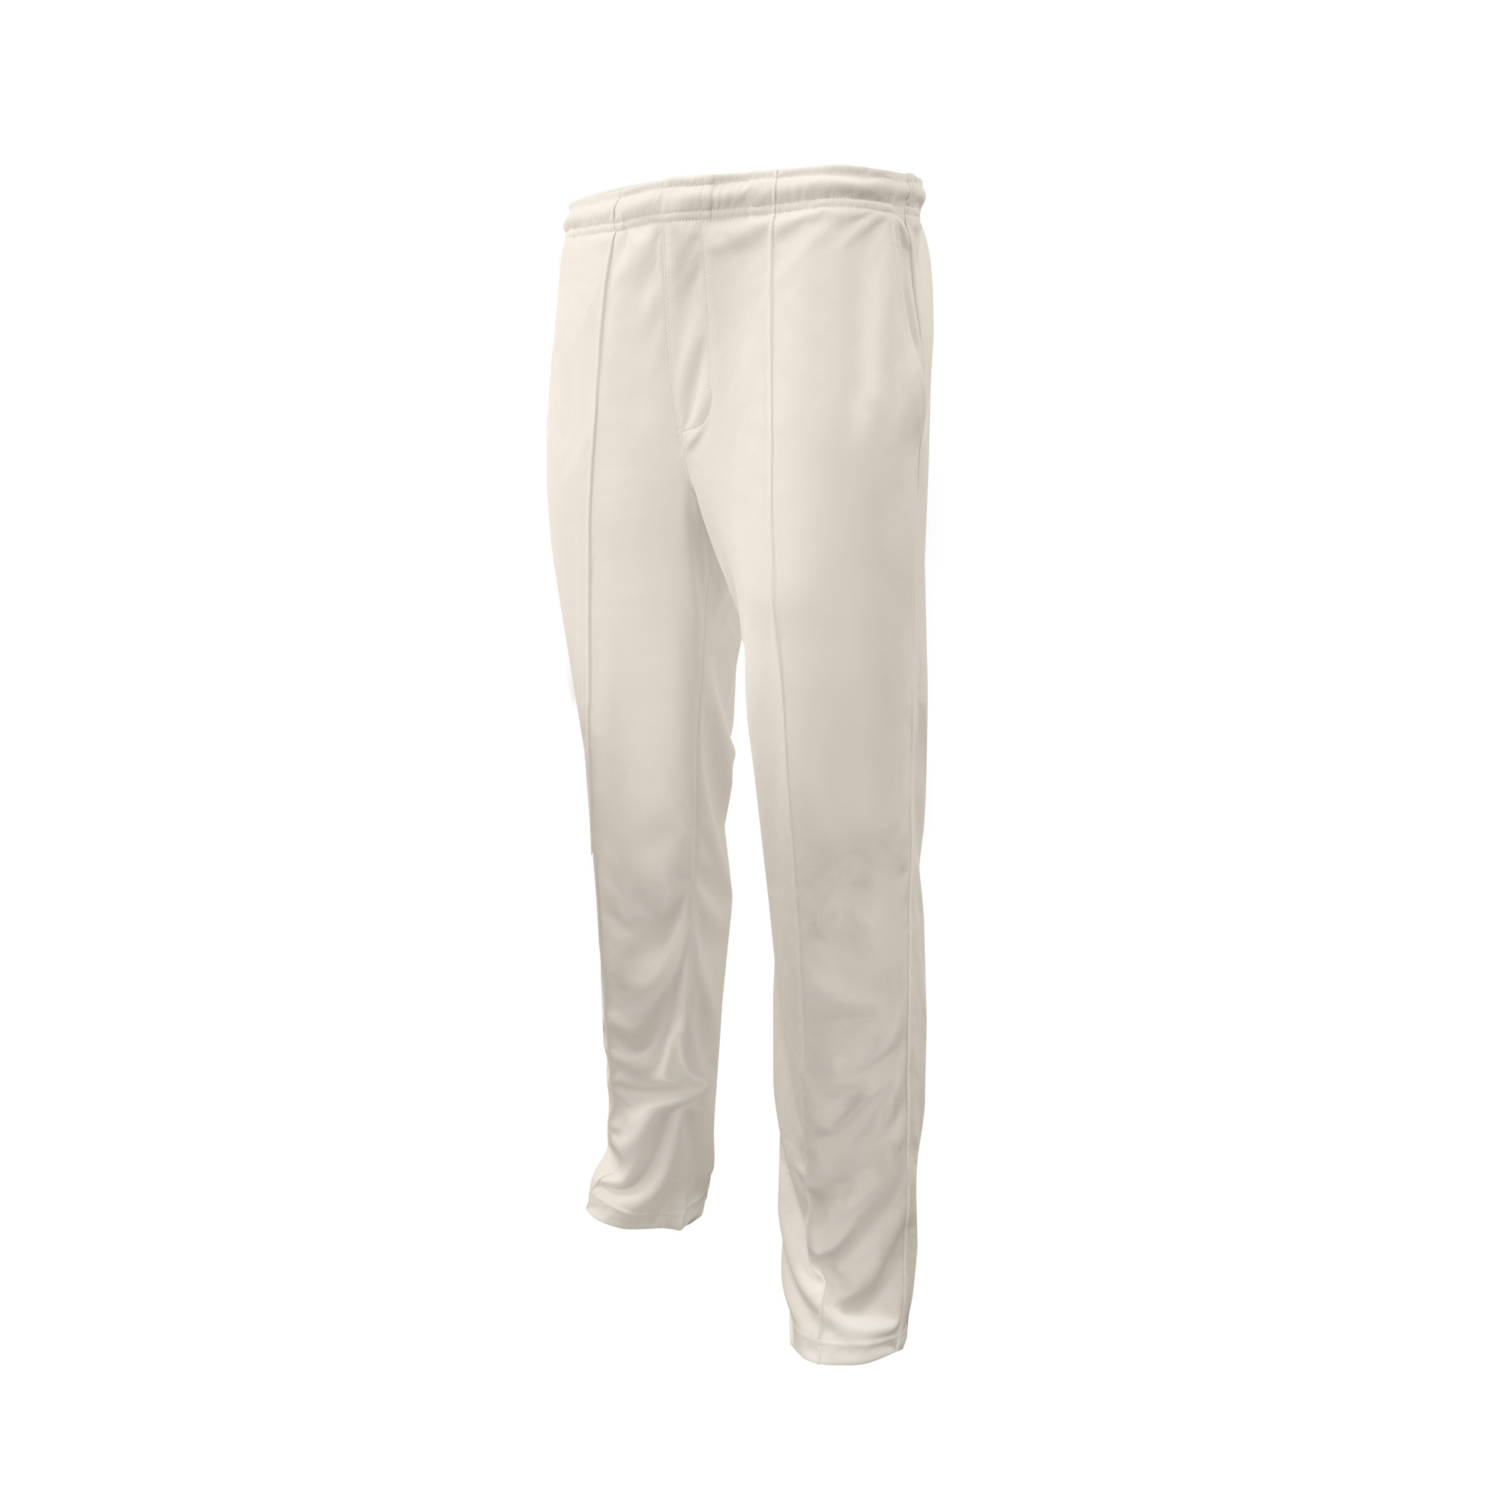 Cricket Playing Trousers